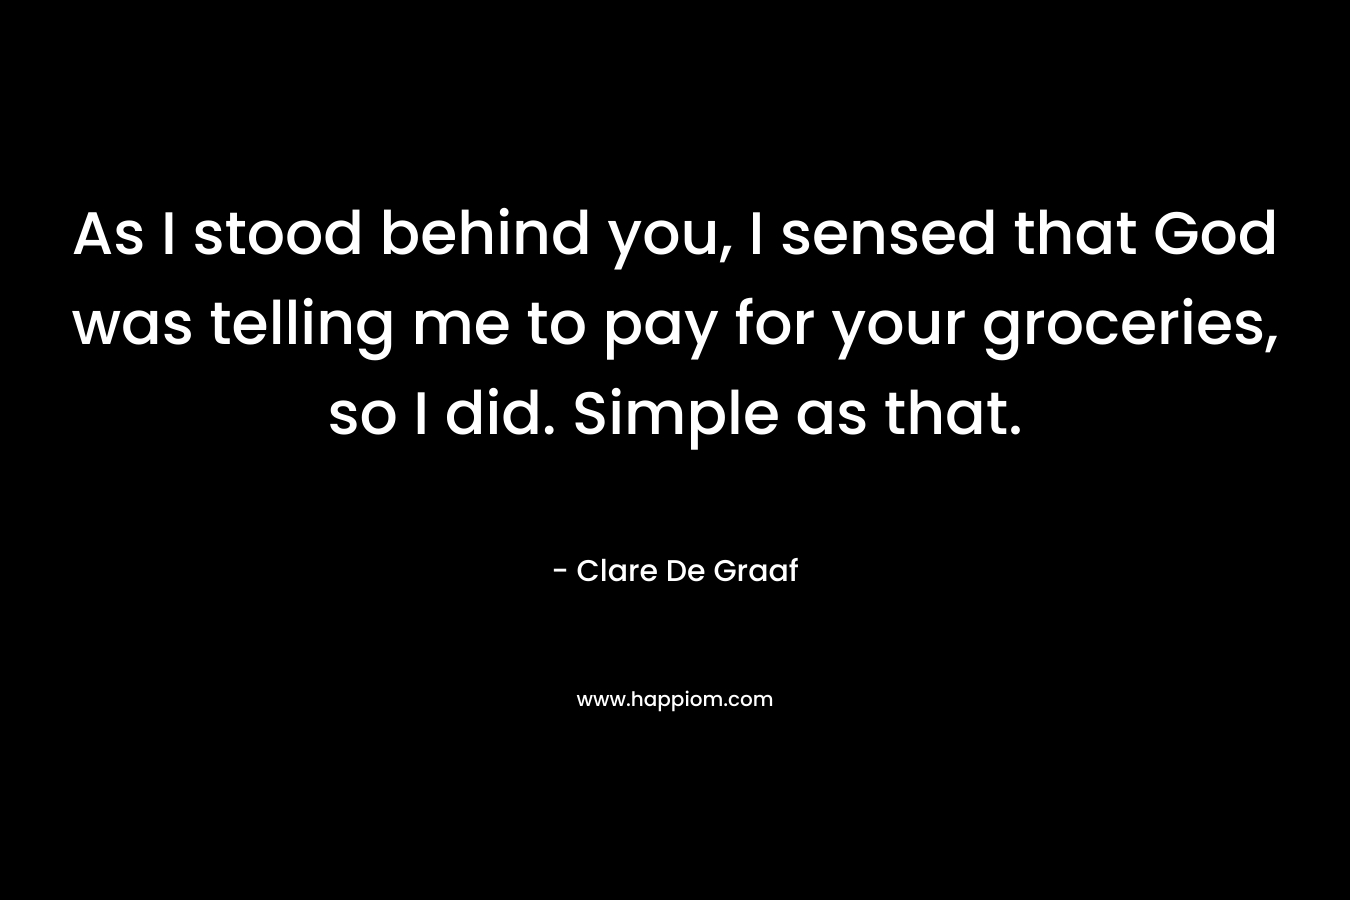 As I stood behind you, I sensed that God was telling me to pay for your groceries, so I did. Simple as that. – Clare De Graaf